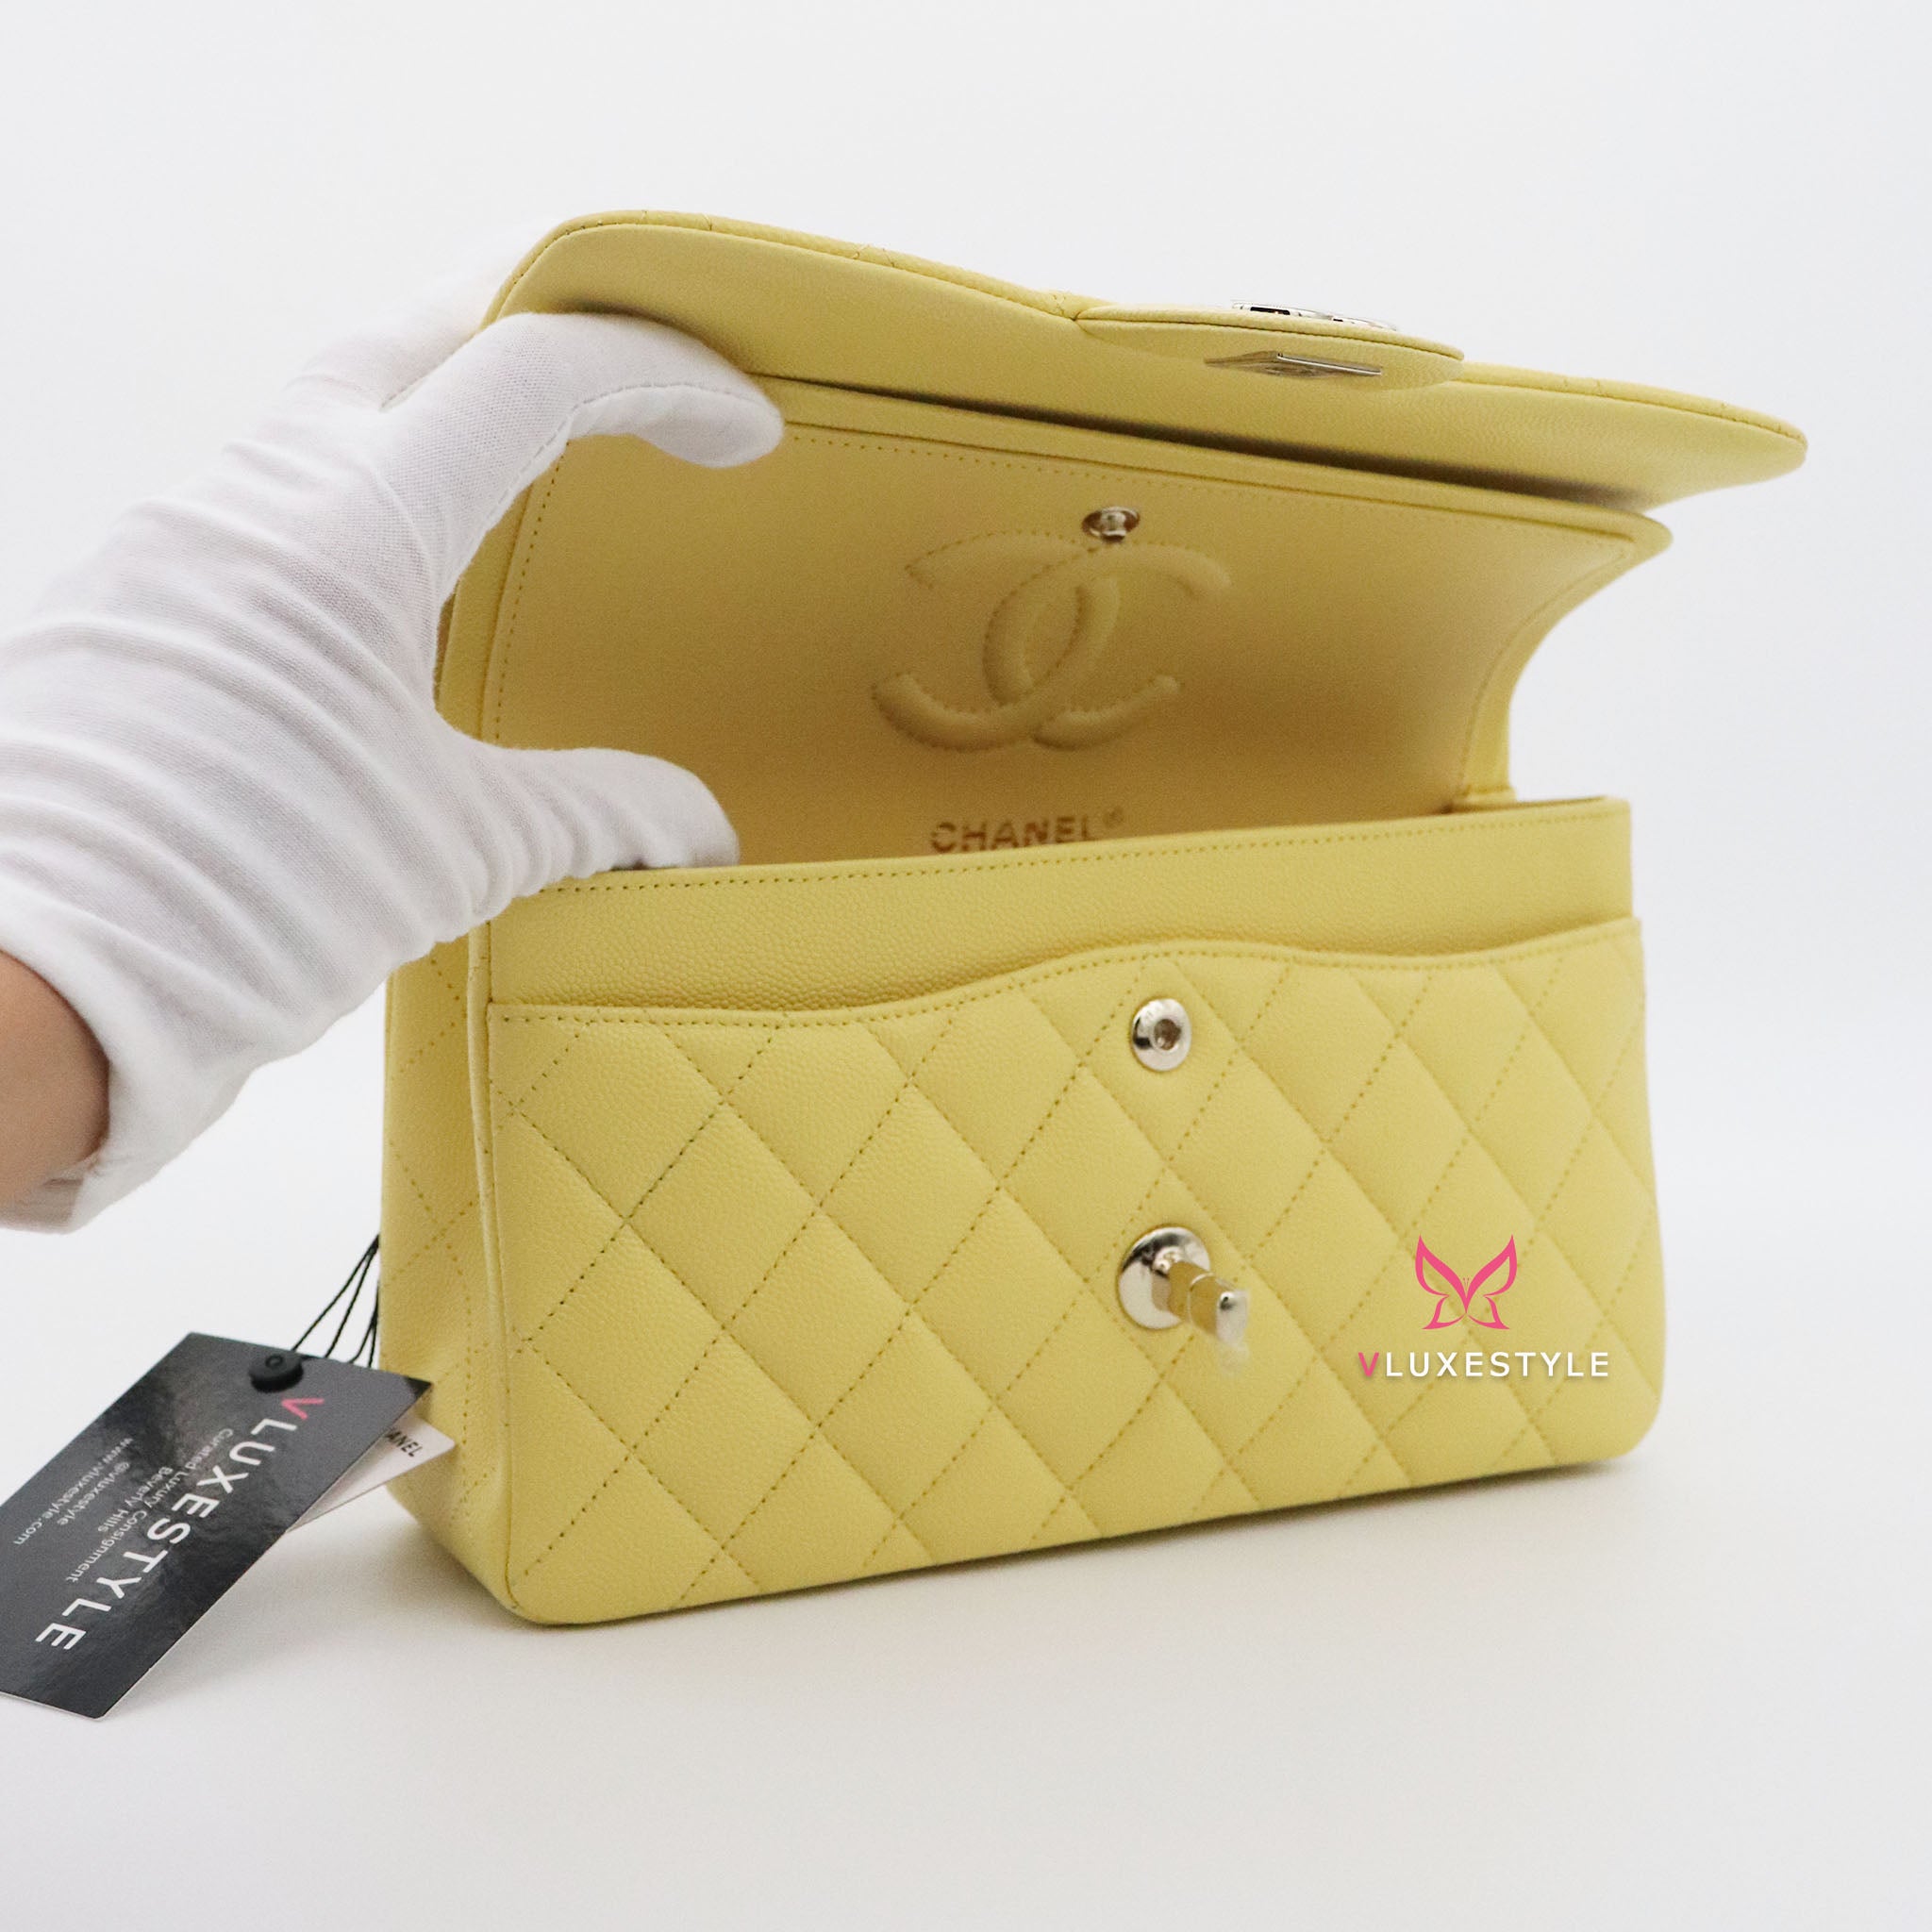 Chanel Yellow Quilted Glazed Crackled Leather Medium Just